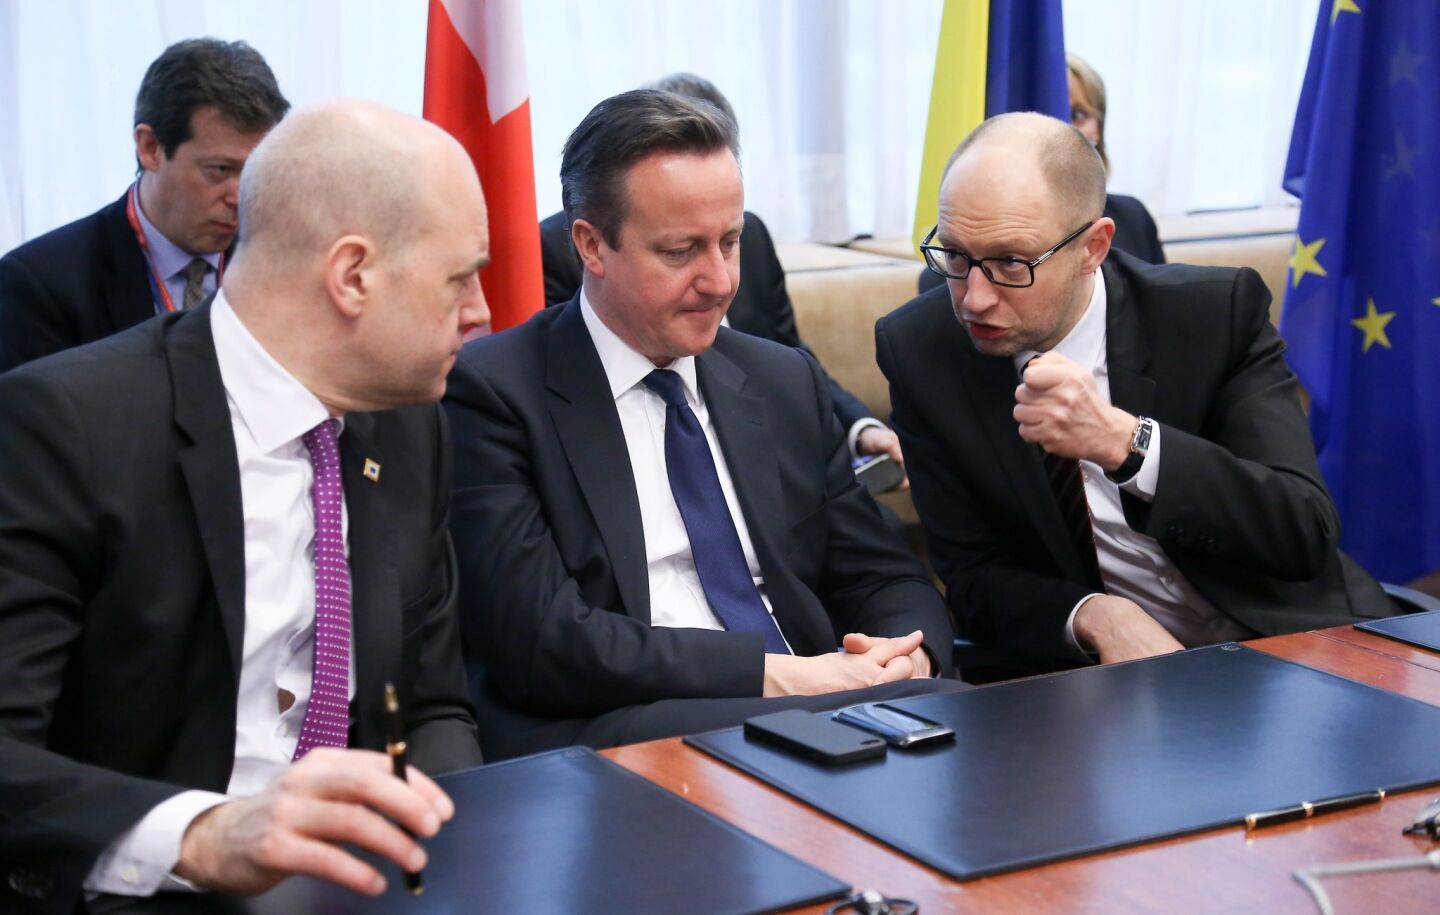 Ukrainian Prime Minister Arseny Yatsenyuk, right, chats with British Prime Minister David Cameron, middle, and Swedish Prime Minister Fredrik Reinfeldt during a signing ceremony at a summit in Brussels.